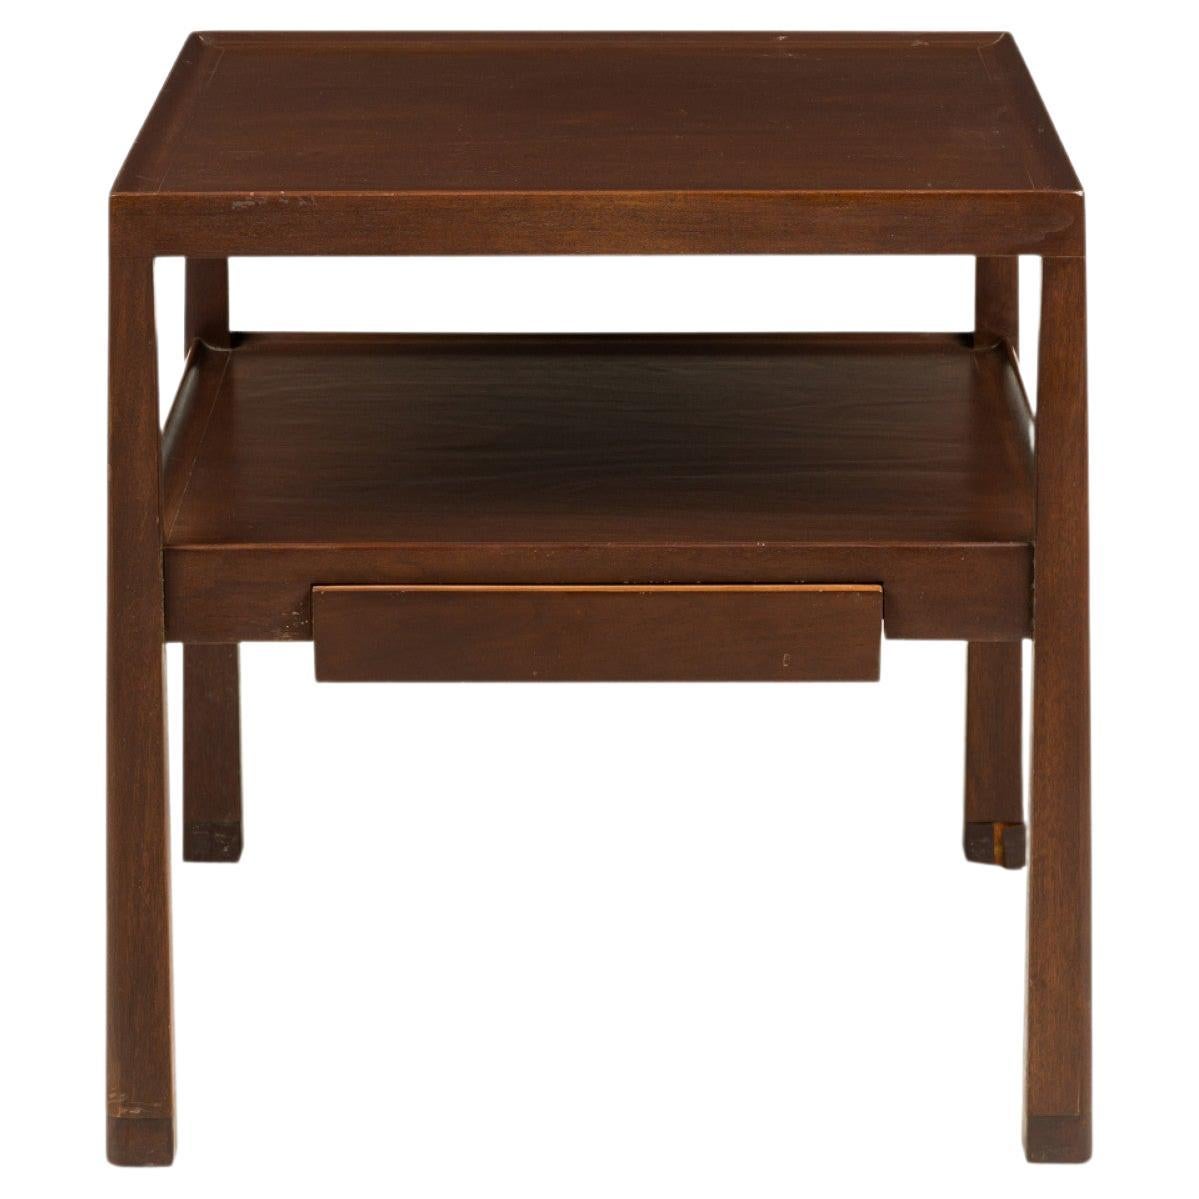 Edward Wormley for Dunbar Dark Finished Wooden Two Tier End / Side Table